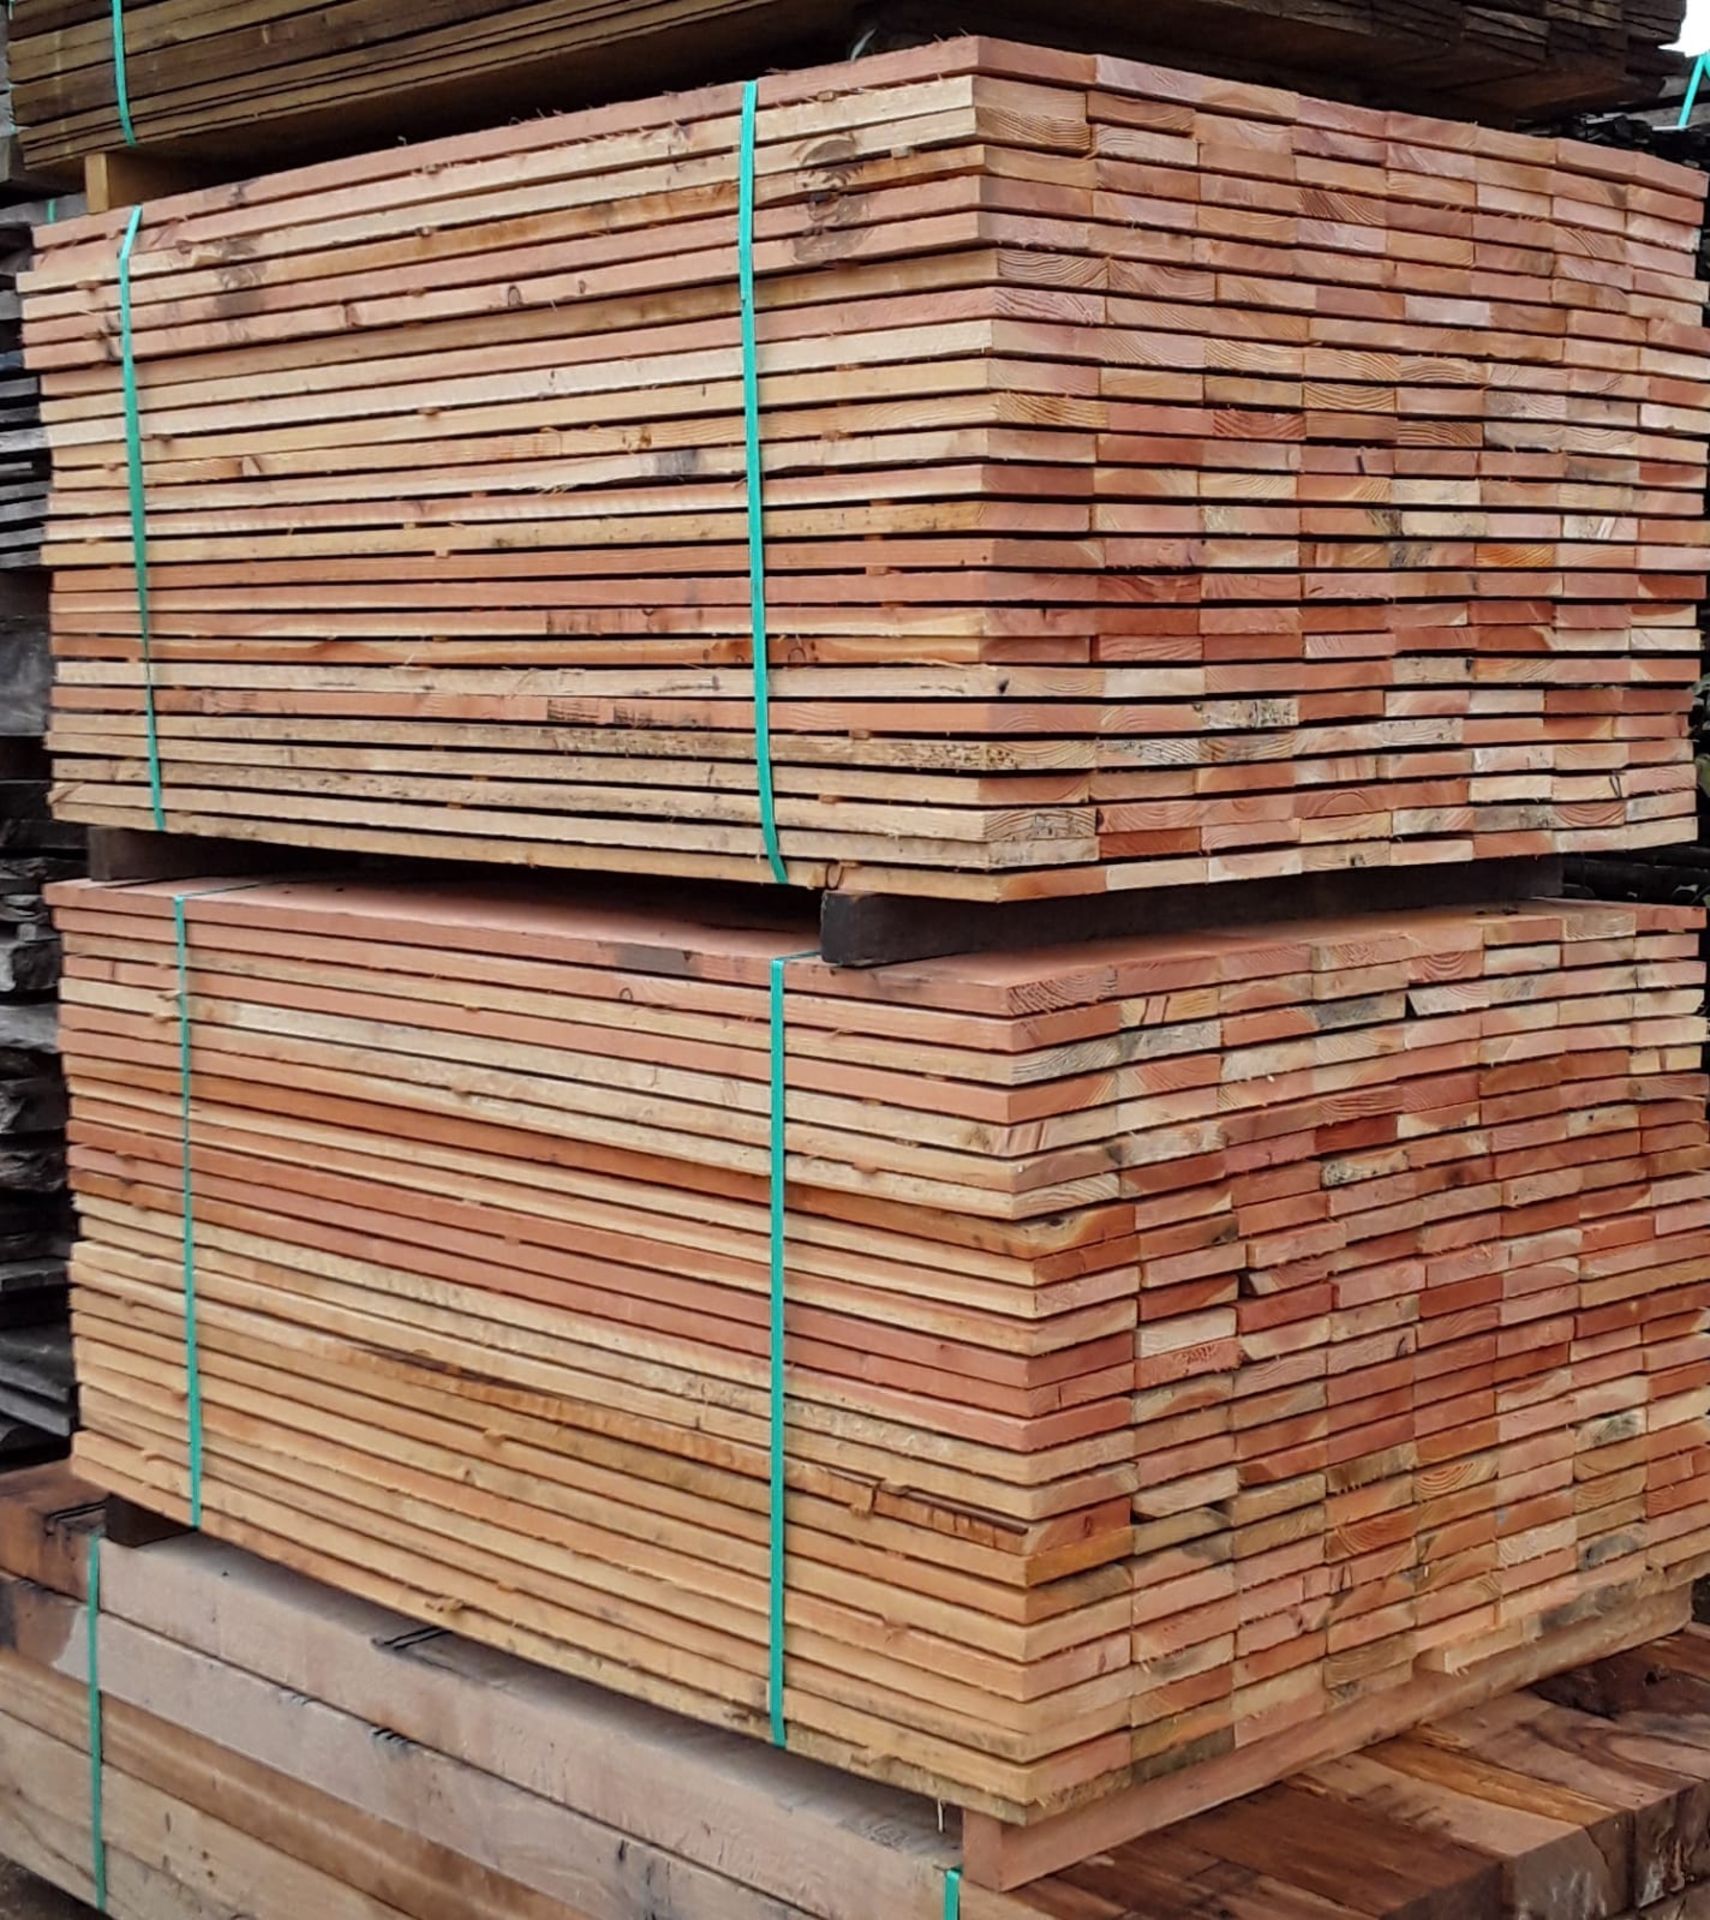 100x Softwood Unseasoned Sawn Mixed Larch / Douglas Fir Boards / Planks / Cladding - Image 6 of 12